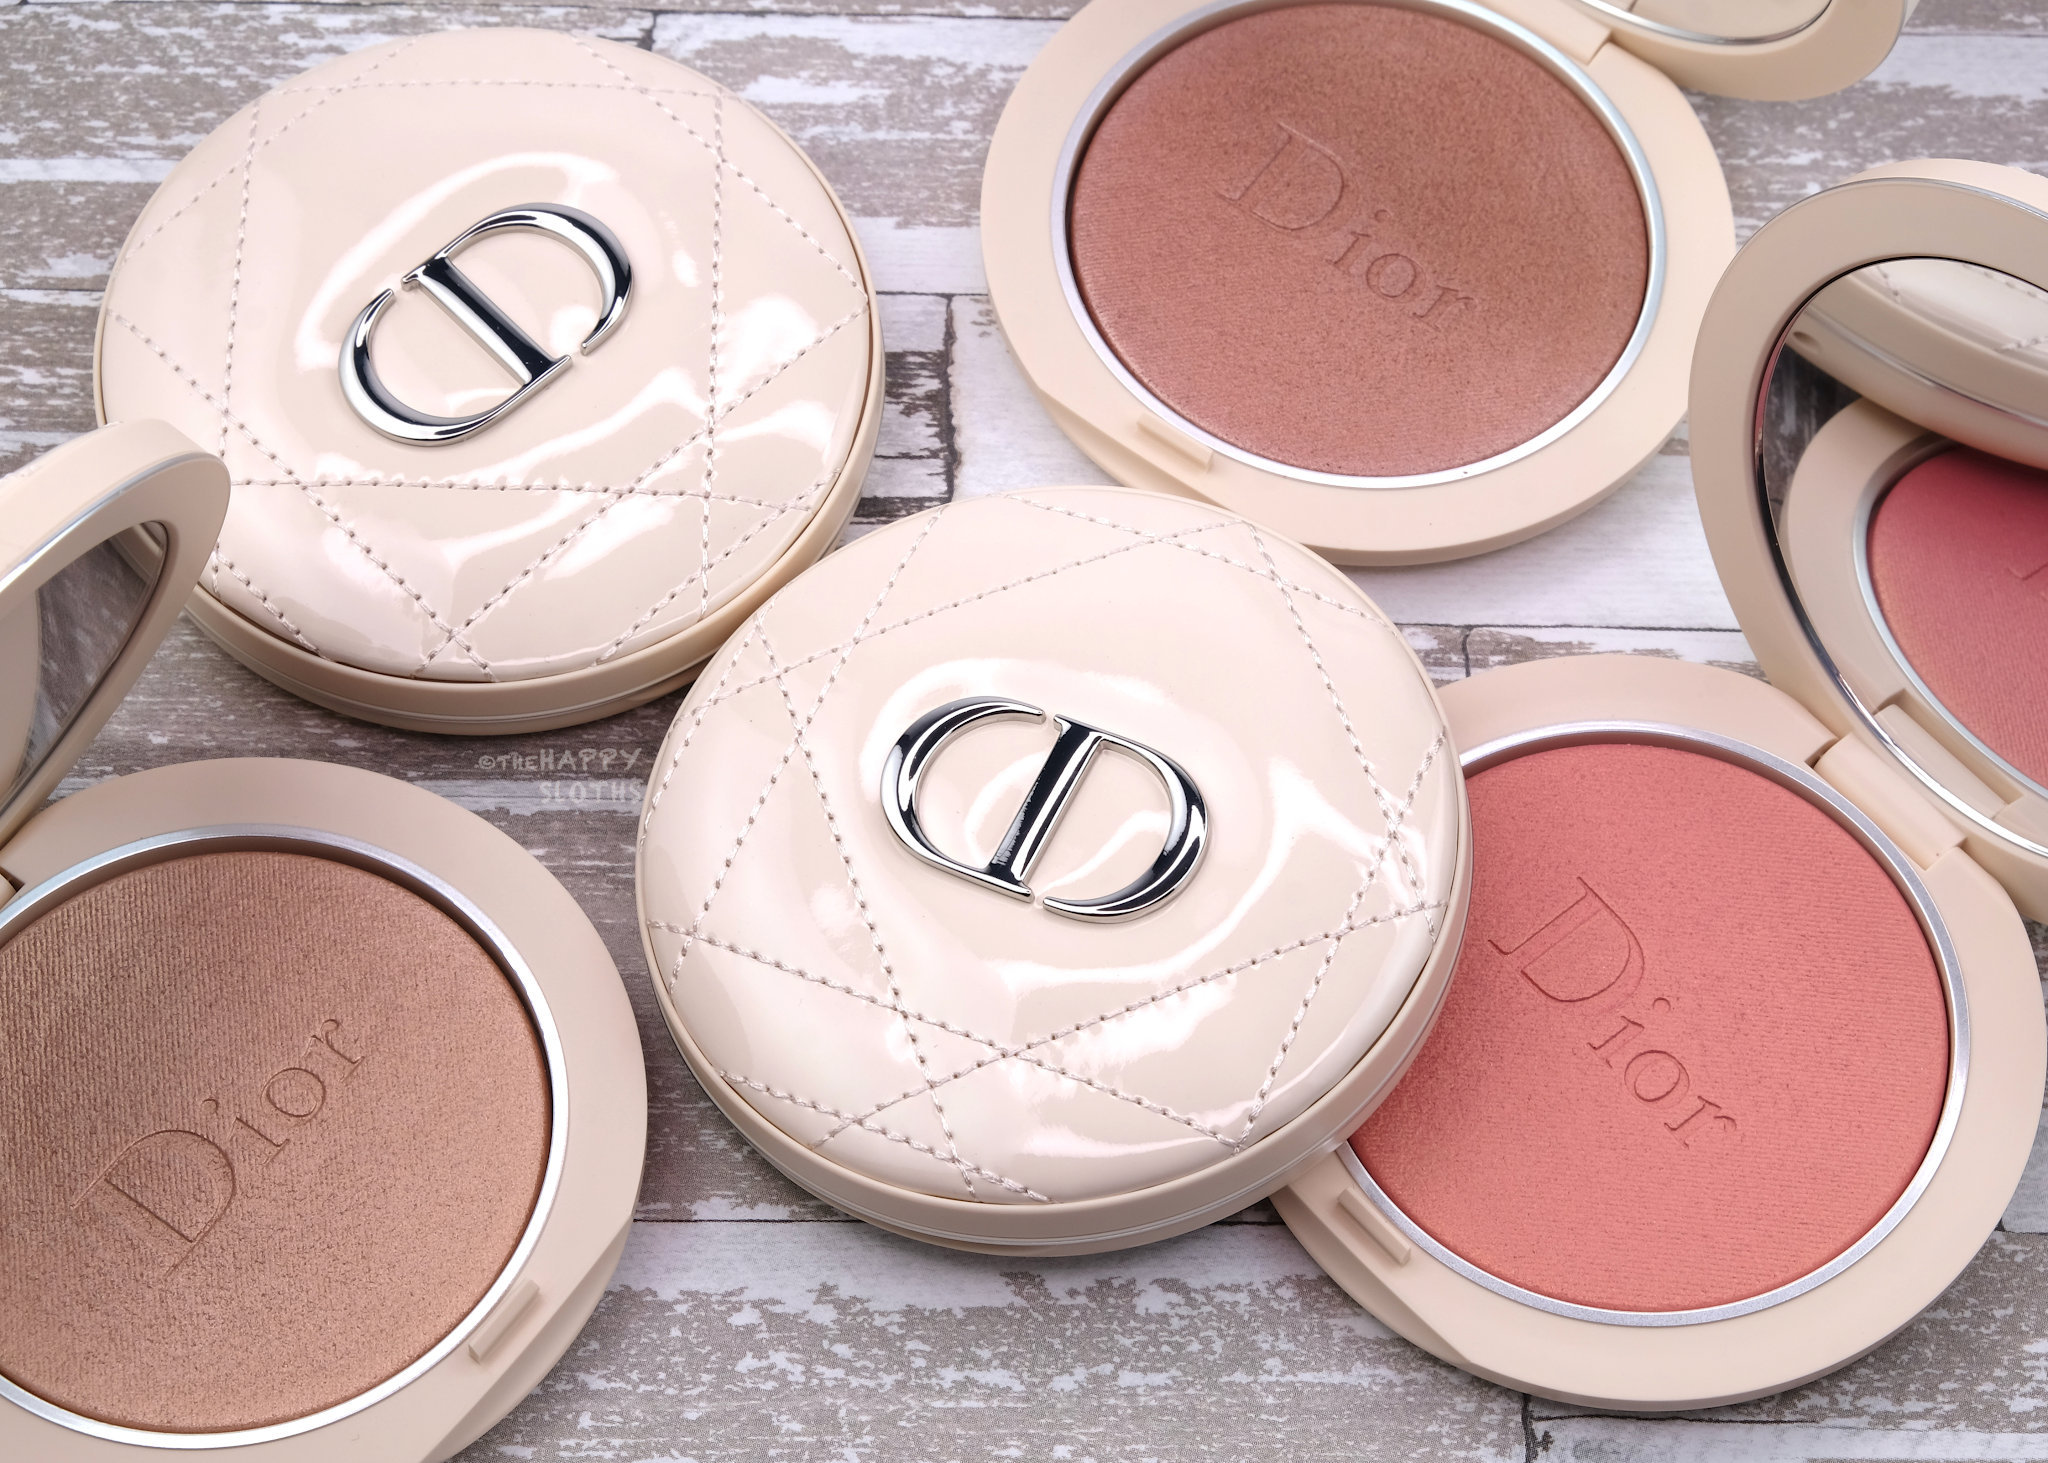 Dior | Dior Couture Luminizer Highlighter Powder: Review and Swatches | The Happy Sloths: Beauty, Makeup, and Skincare Blog with Reviews and Swatches